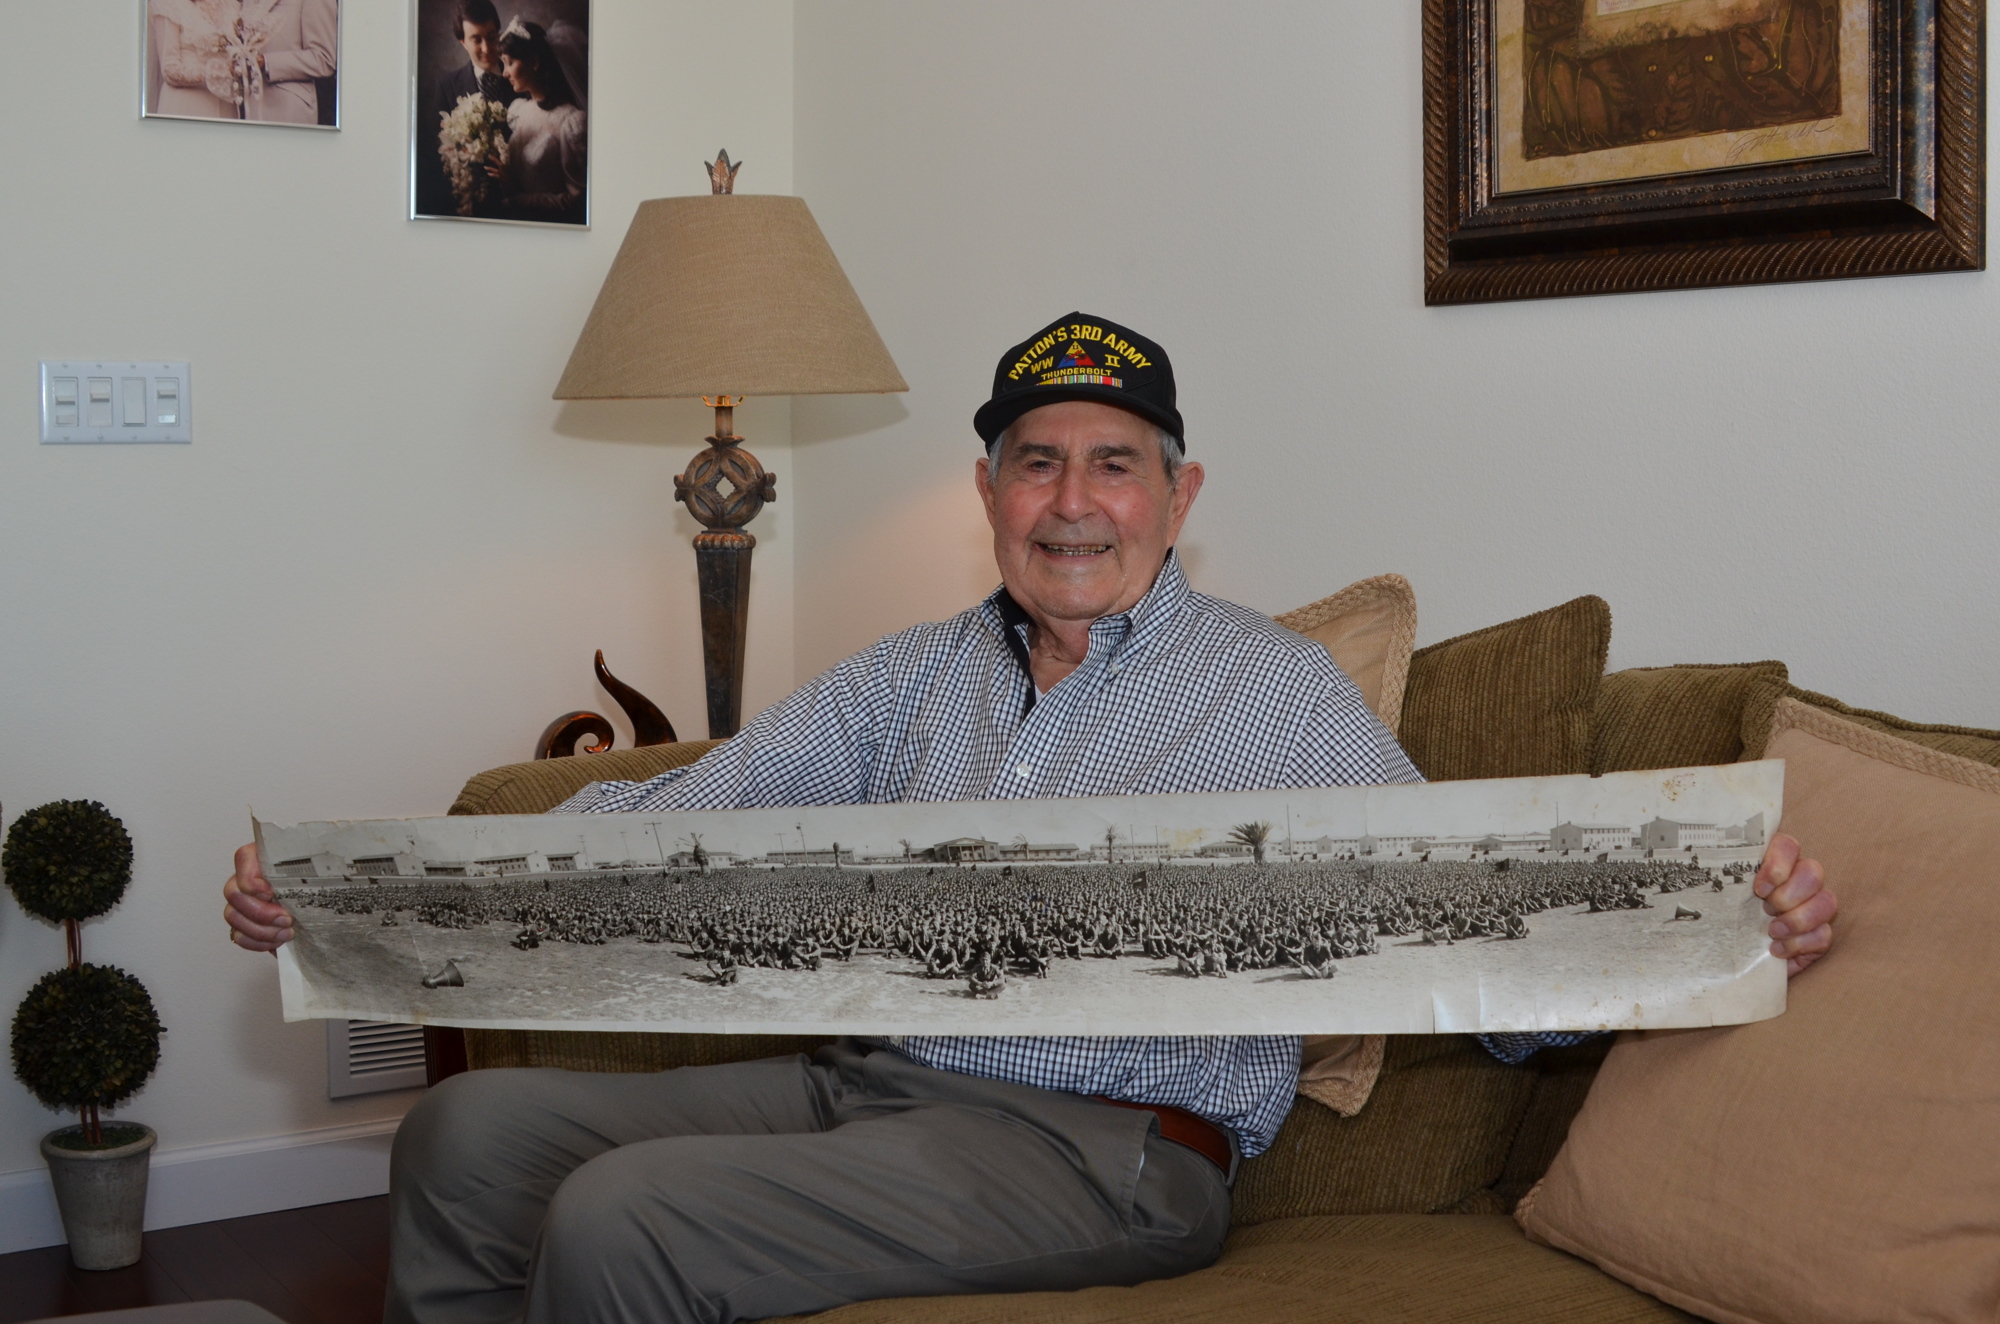 Gilbert Waganheim trained at Camp Pope, in Louisiana, before being shipped to Europe to fight in World War II.